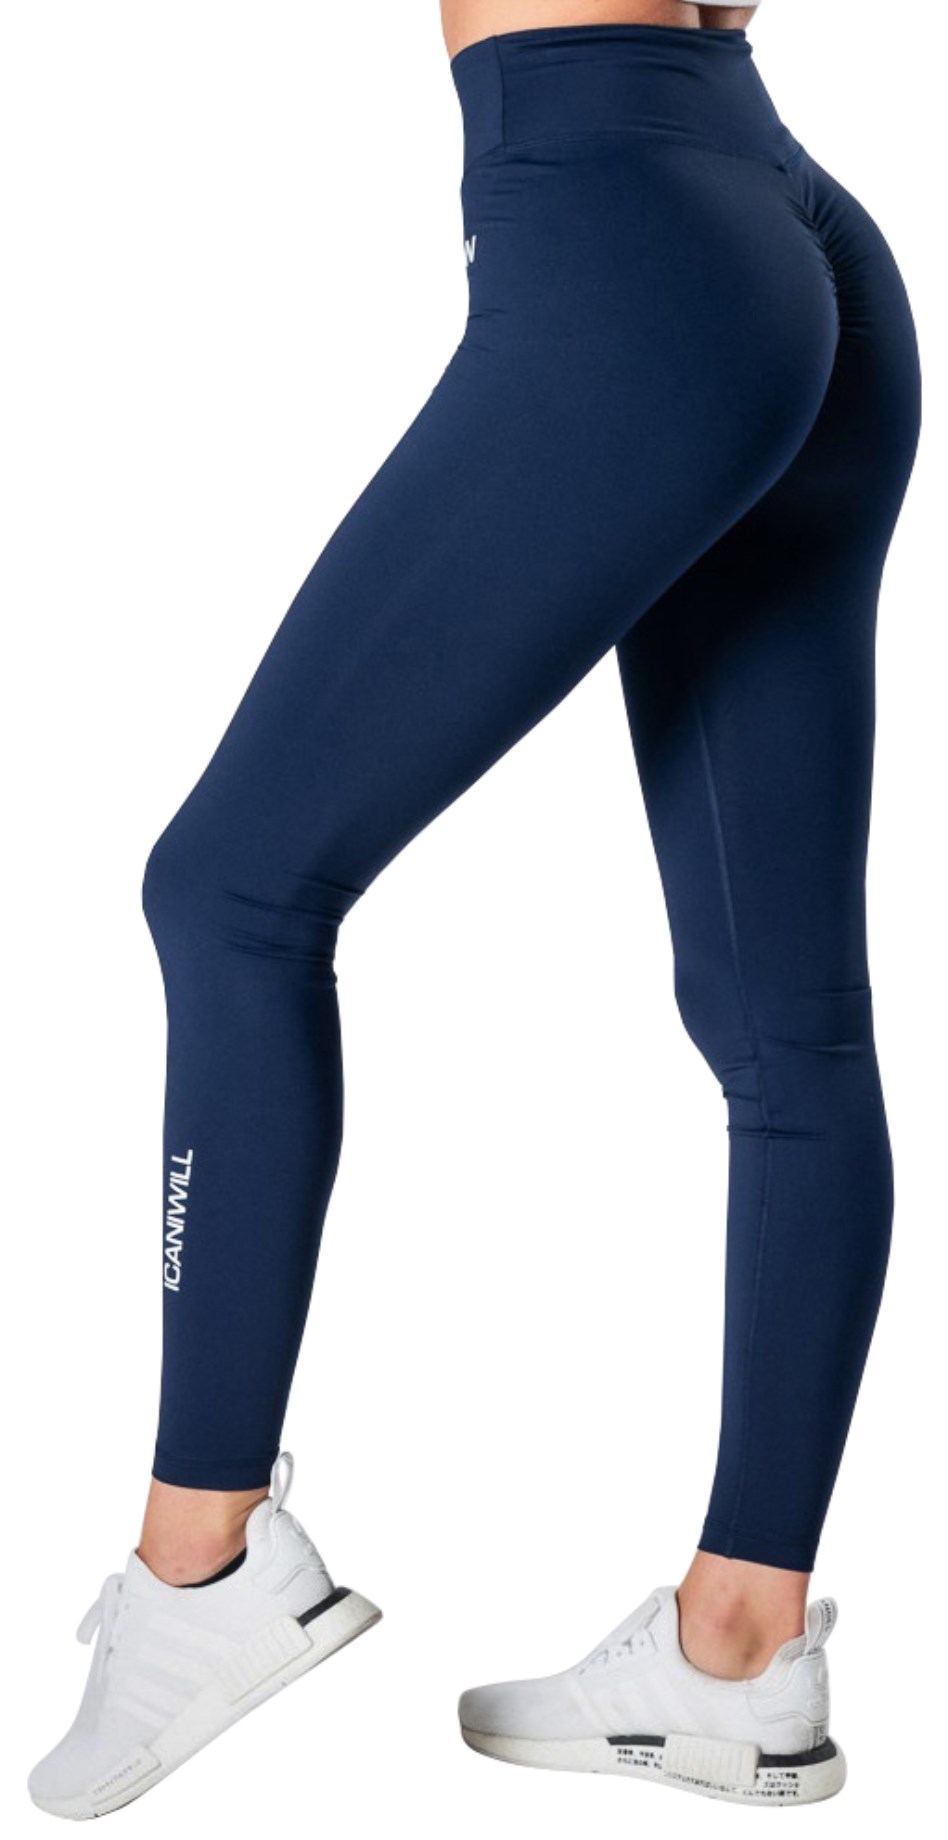 Women's ICIW – Icaniwill Sports tights, size 34 (Blue) | Emmy